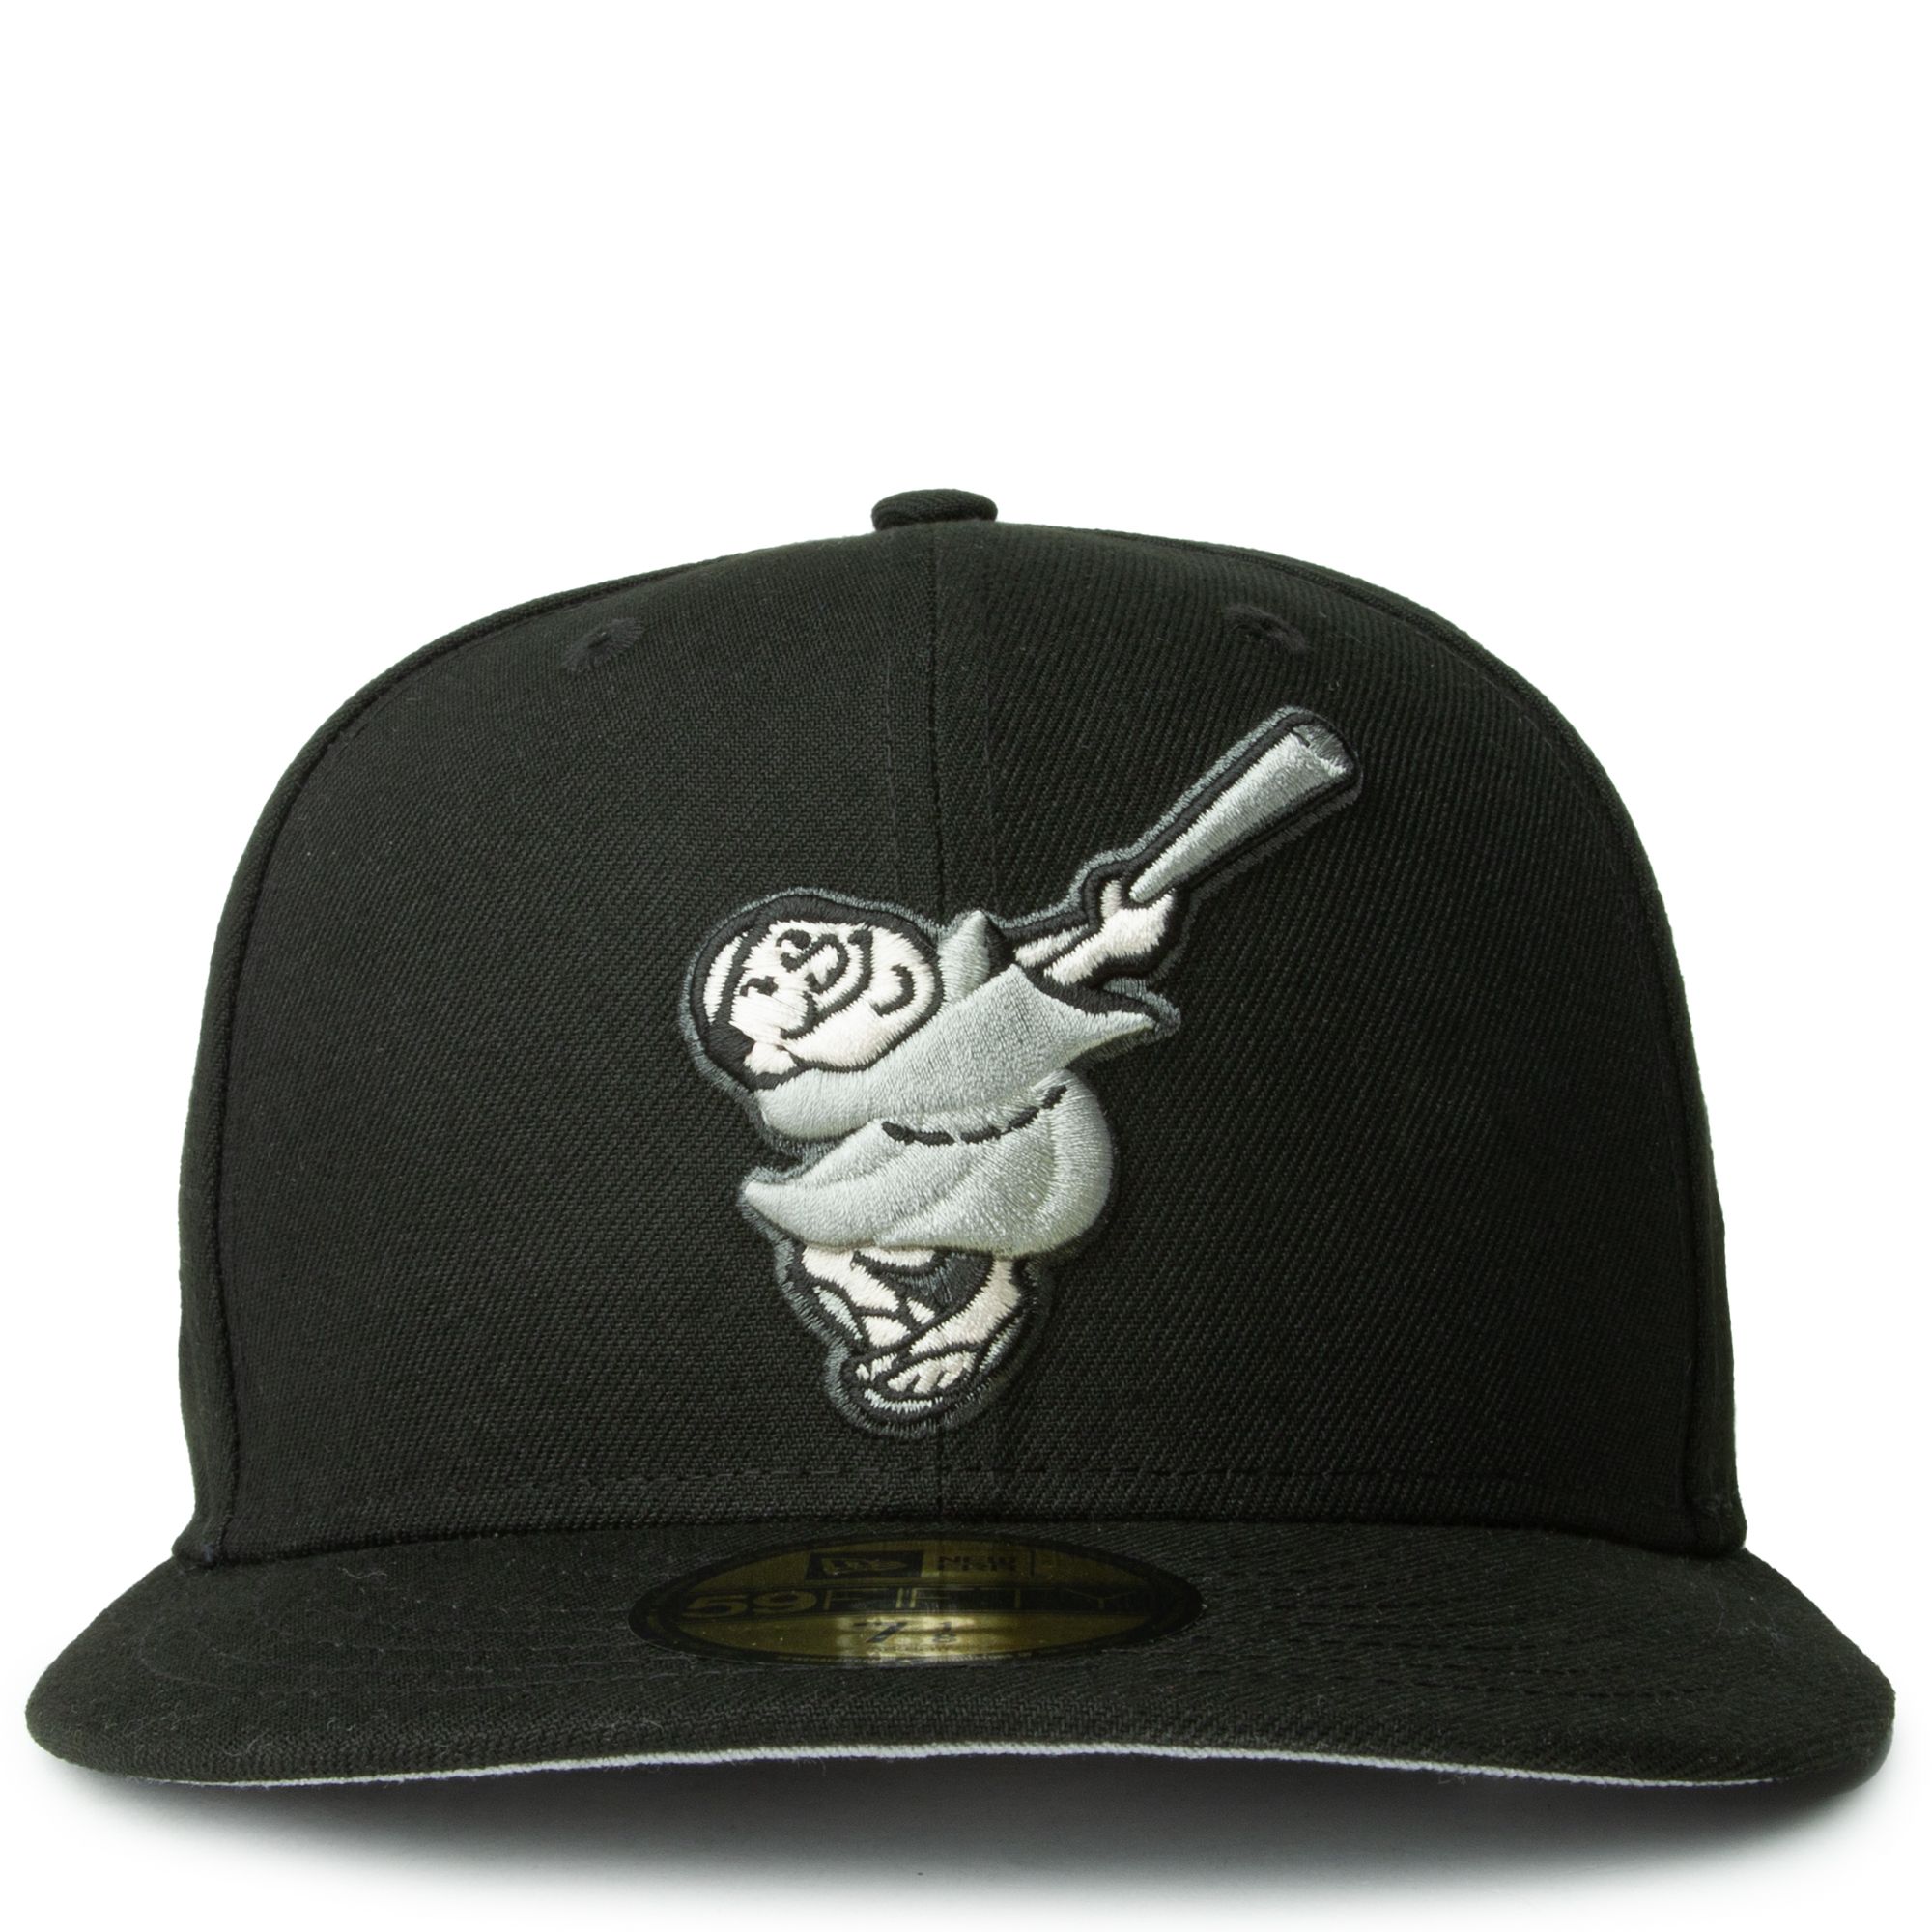 NEW ERA CAPS San Diego Padres Fitted Cap 80179074 - Shiekh